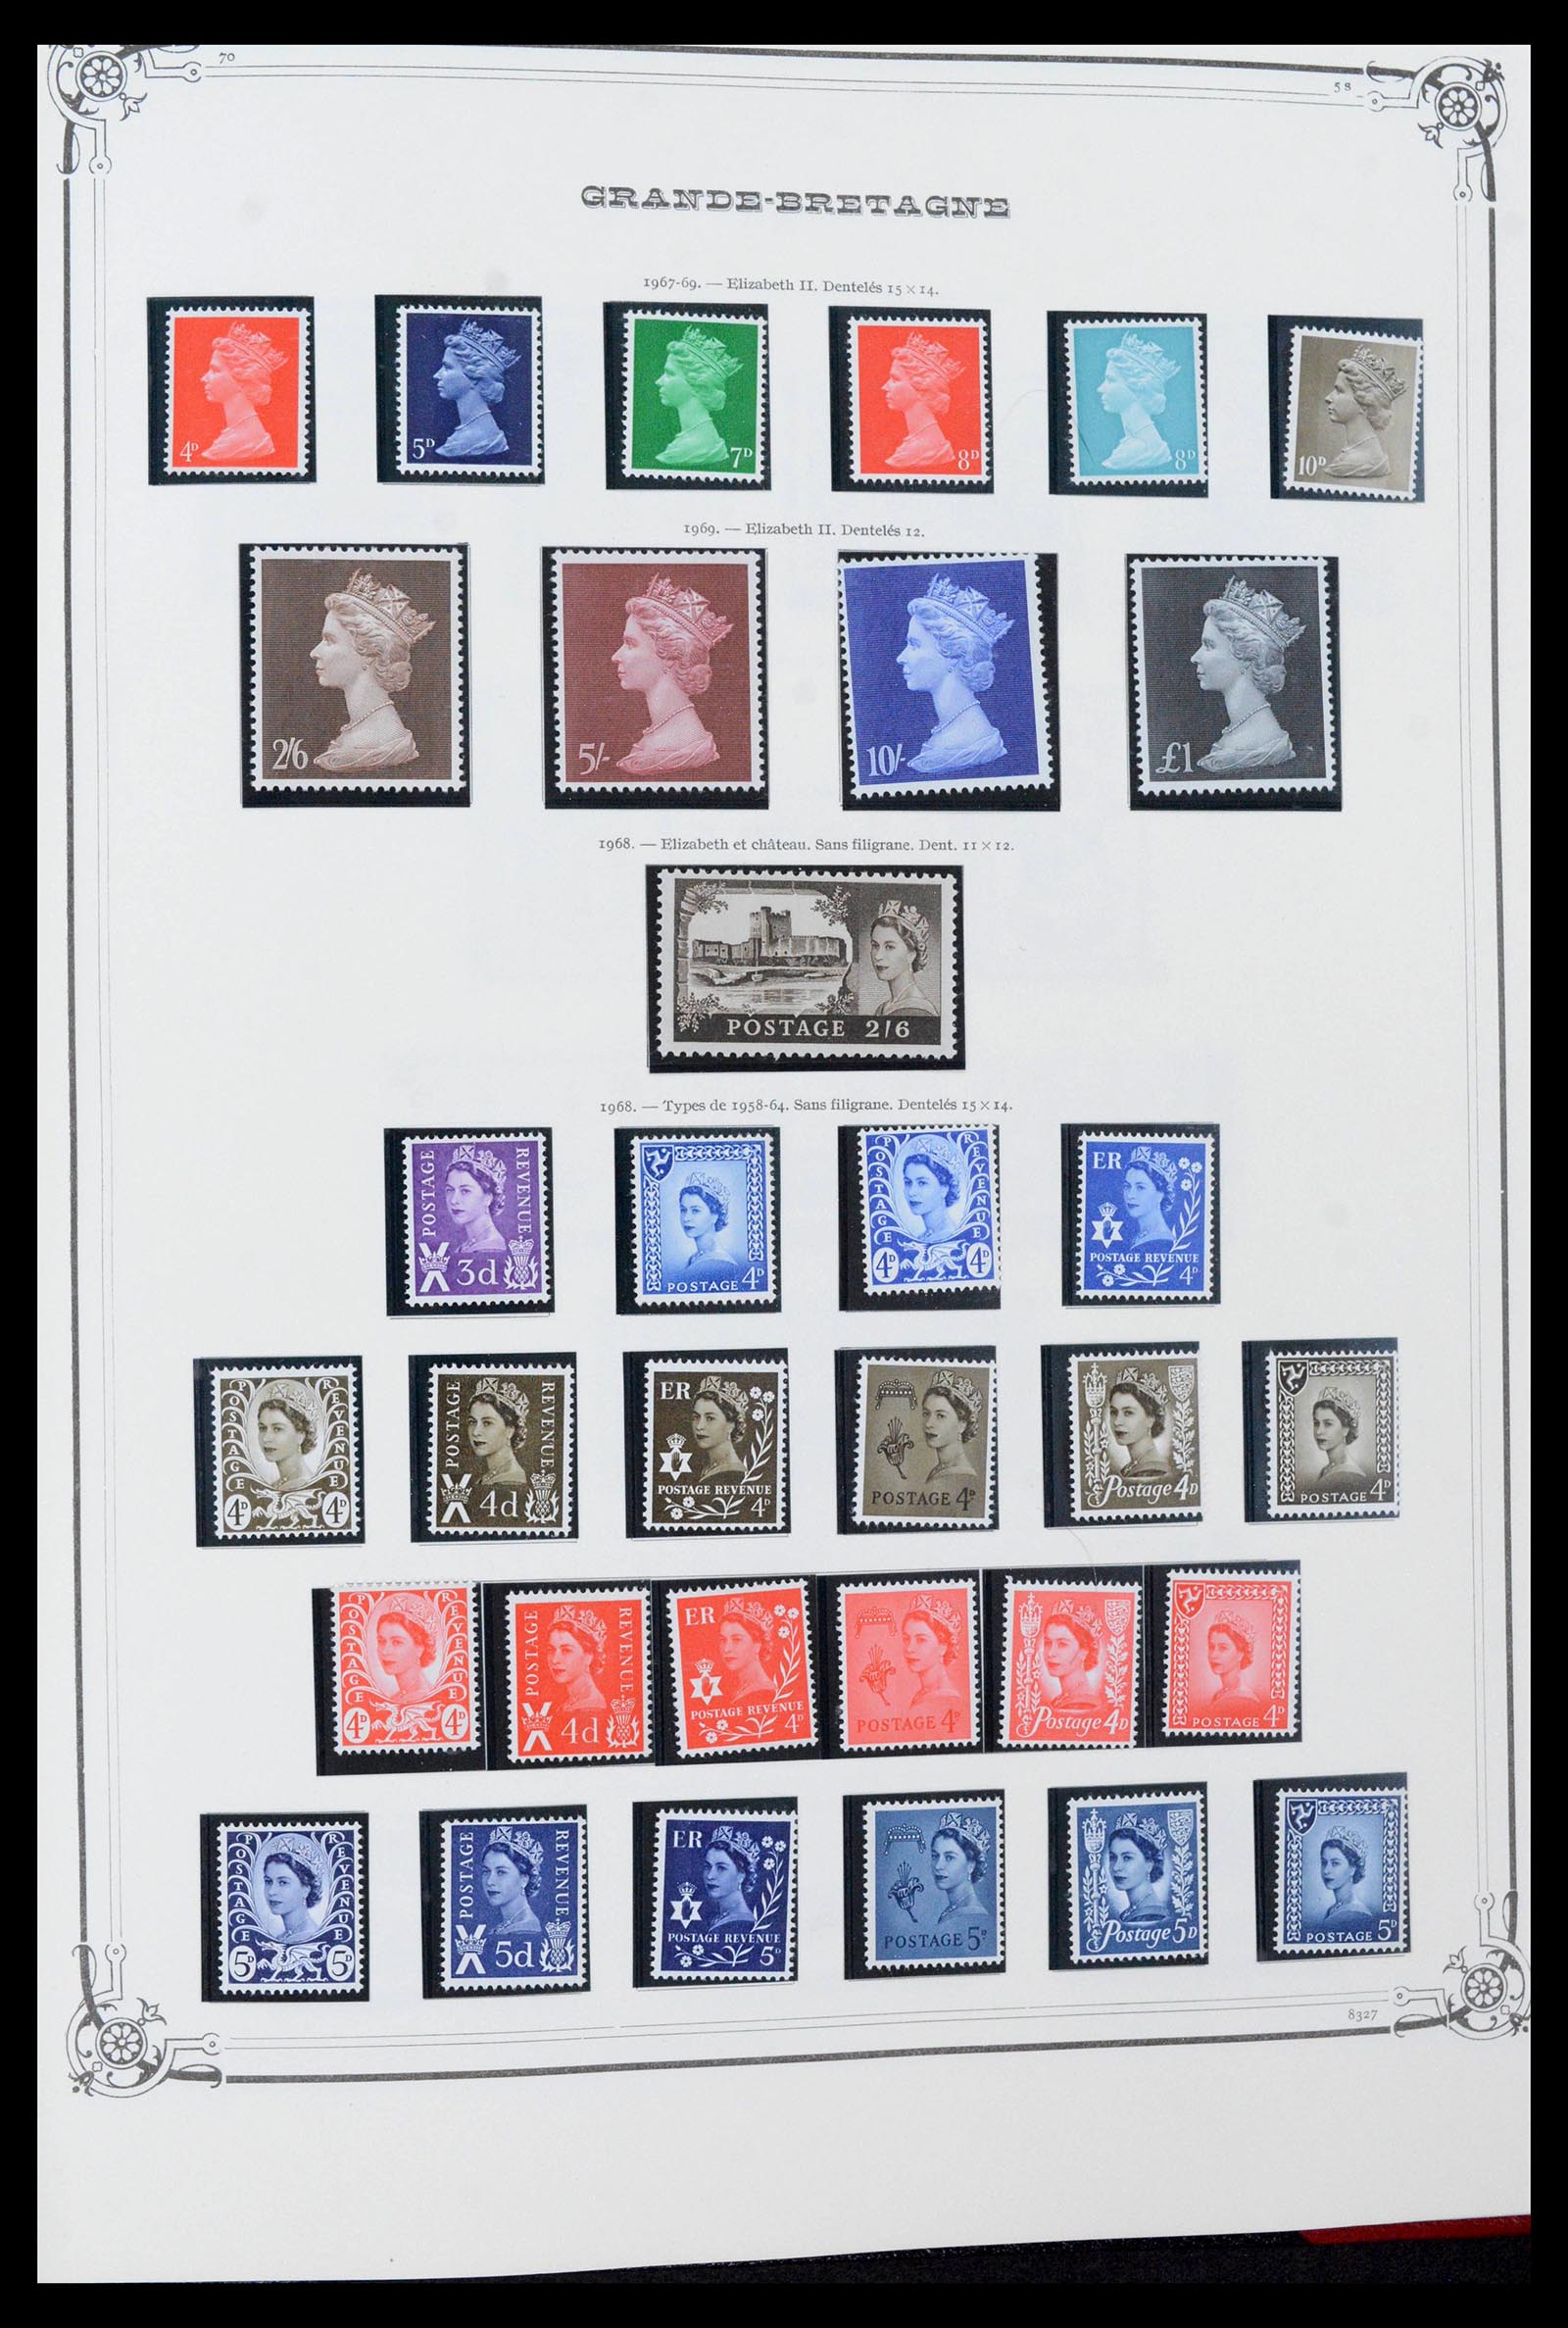 39280 0023 - Stamp collection 39280 Great Britain 1840-1981.